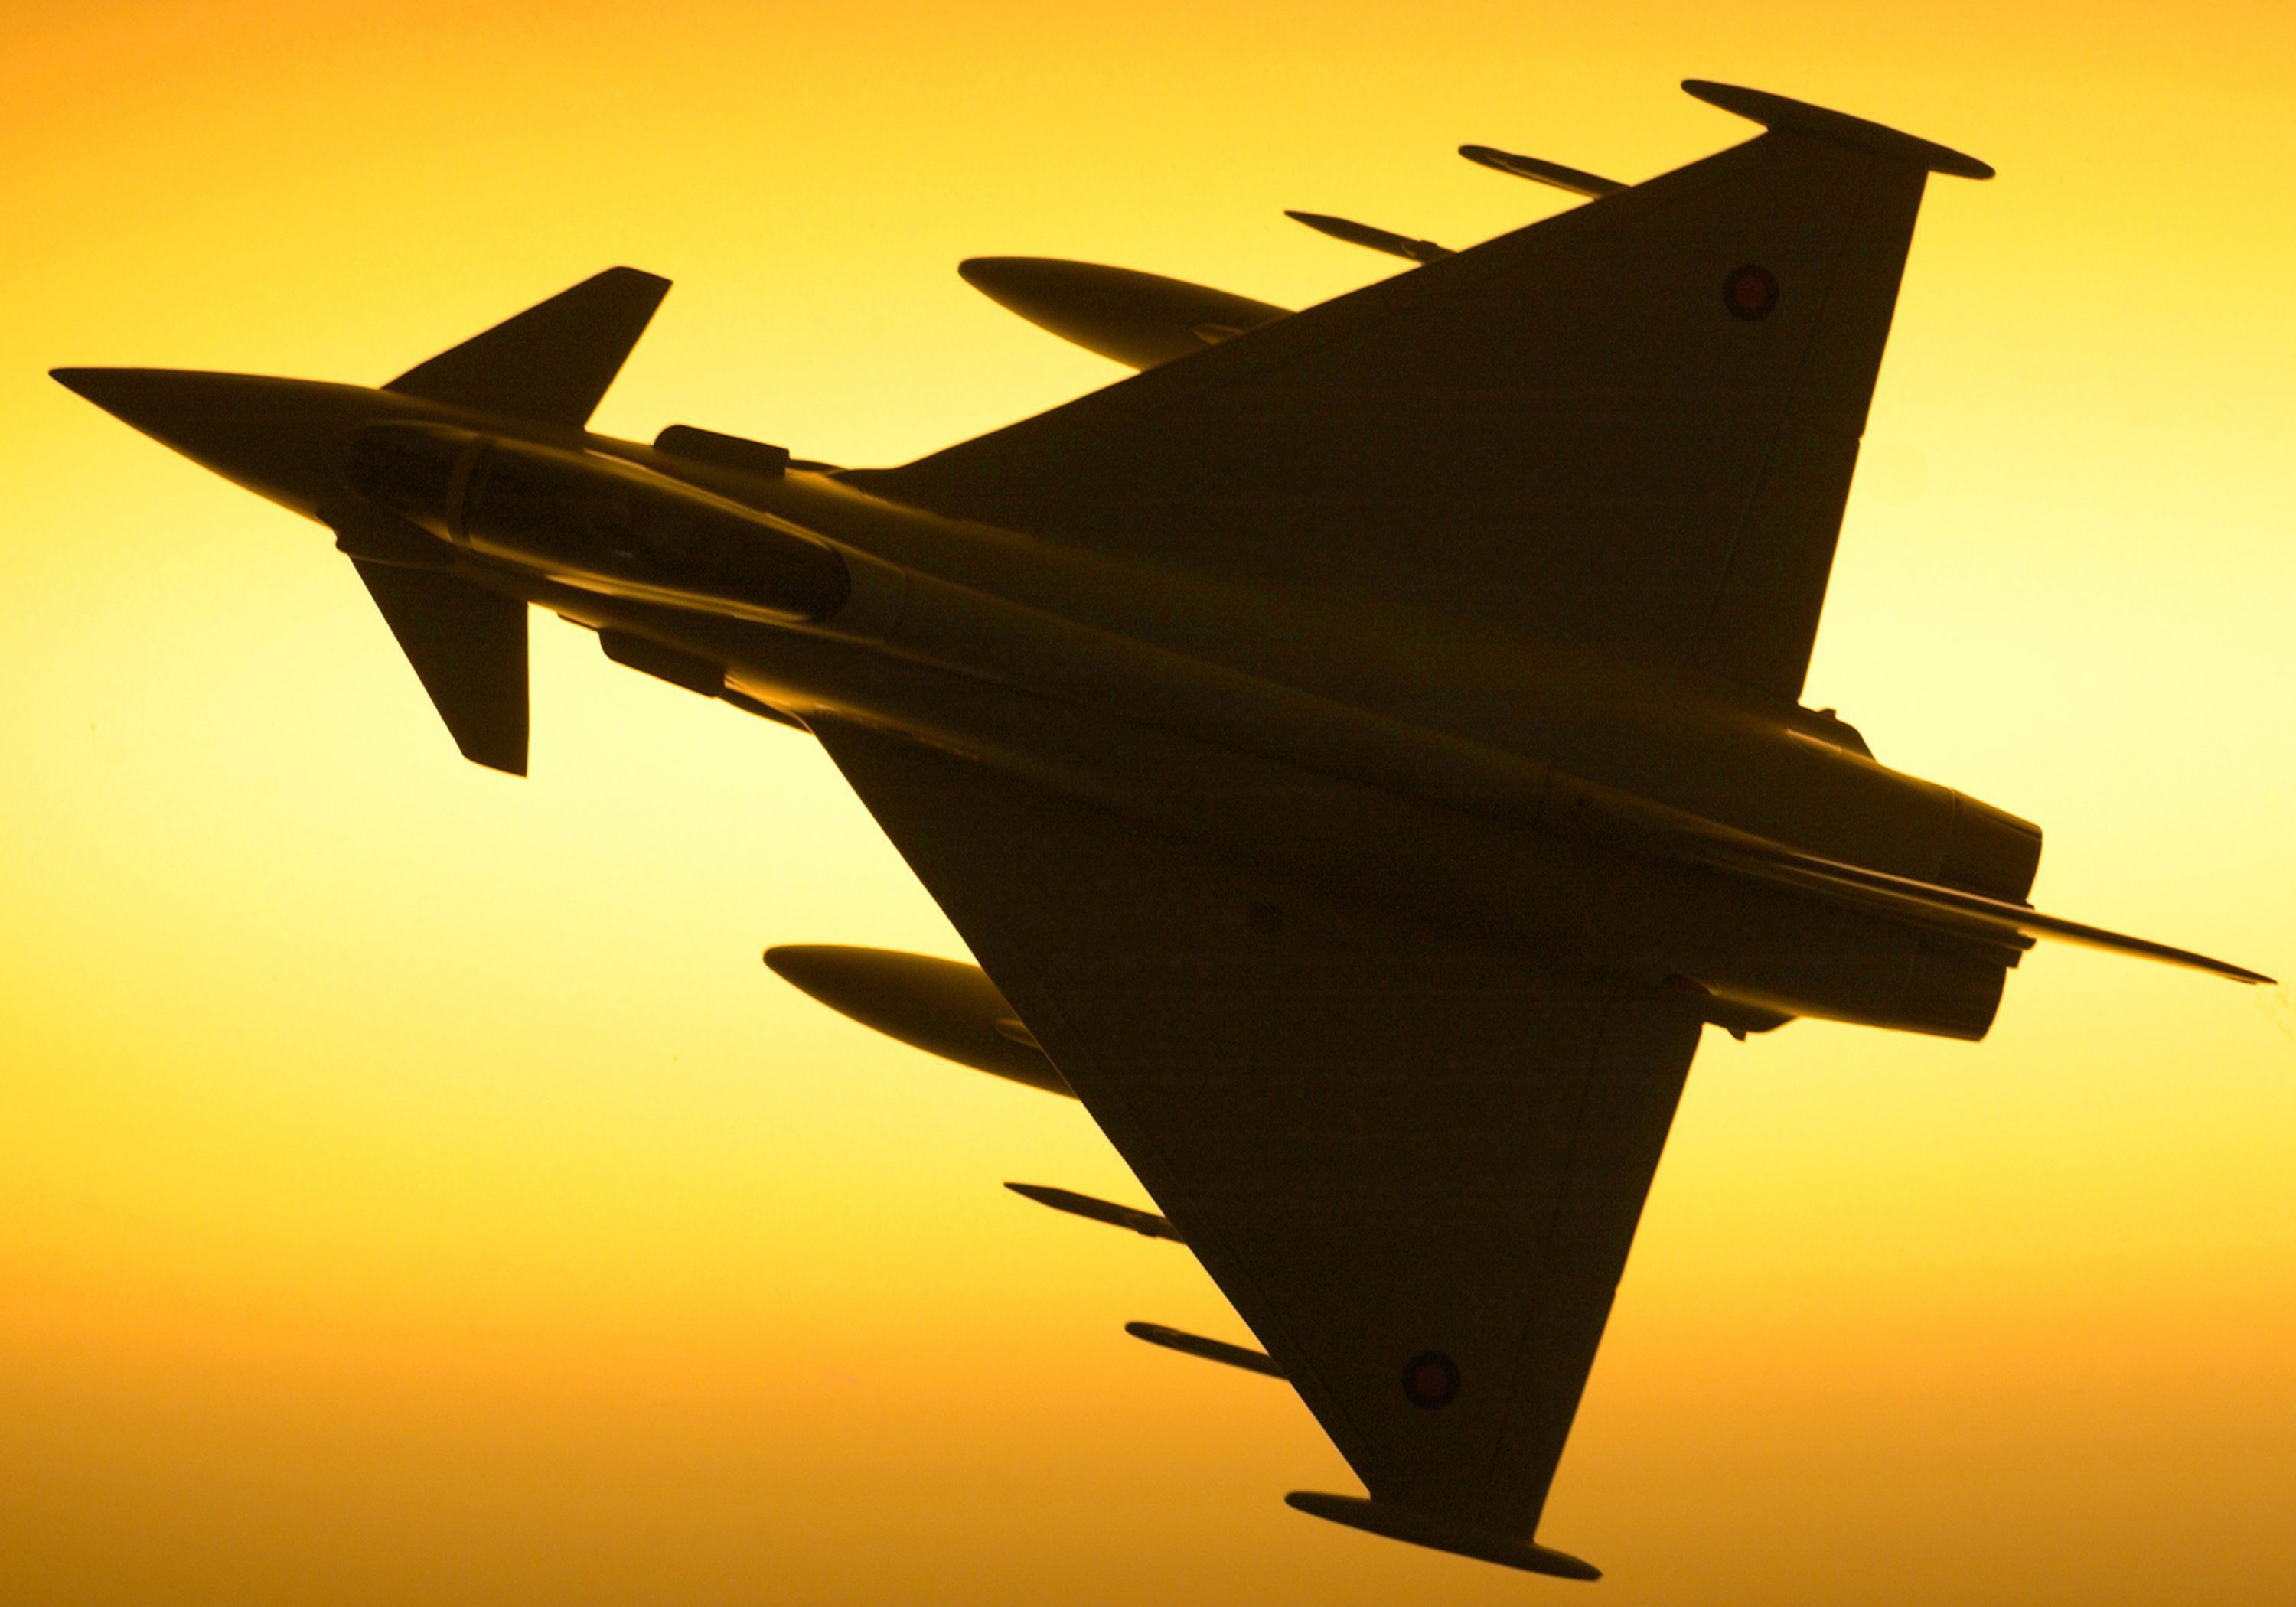 File:Royal Air Force Typhoon F2 jet fighter is silhouetted against ...